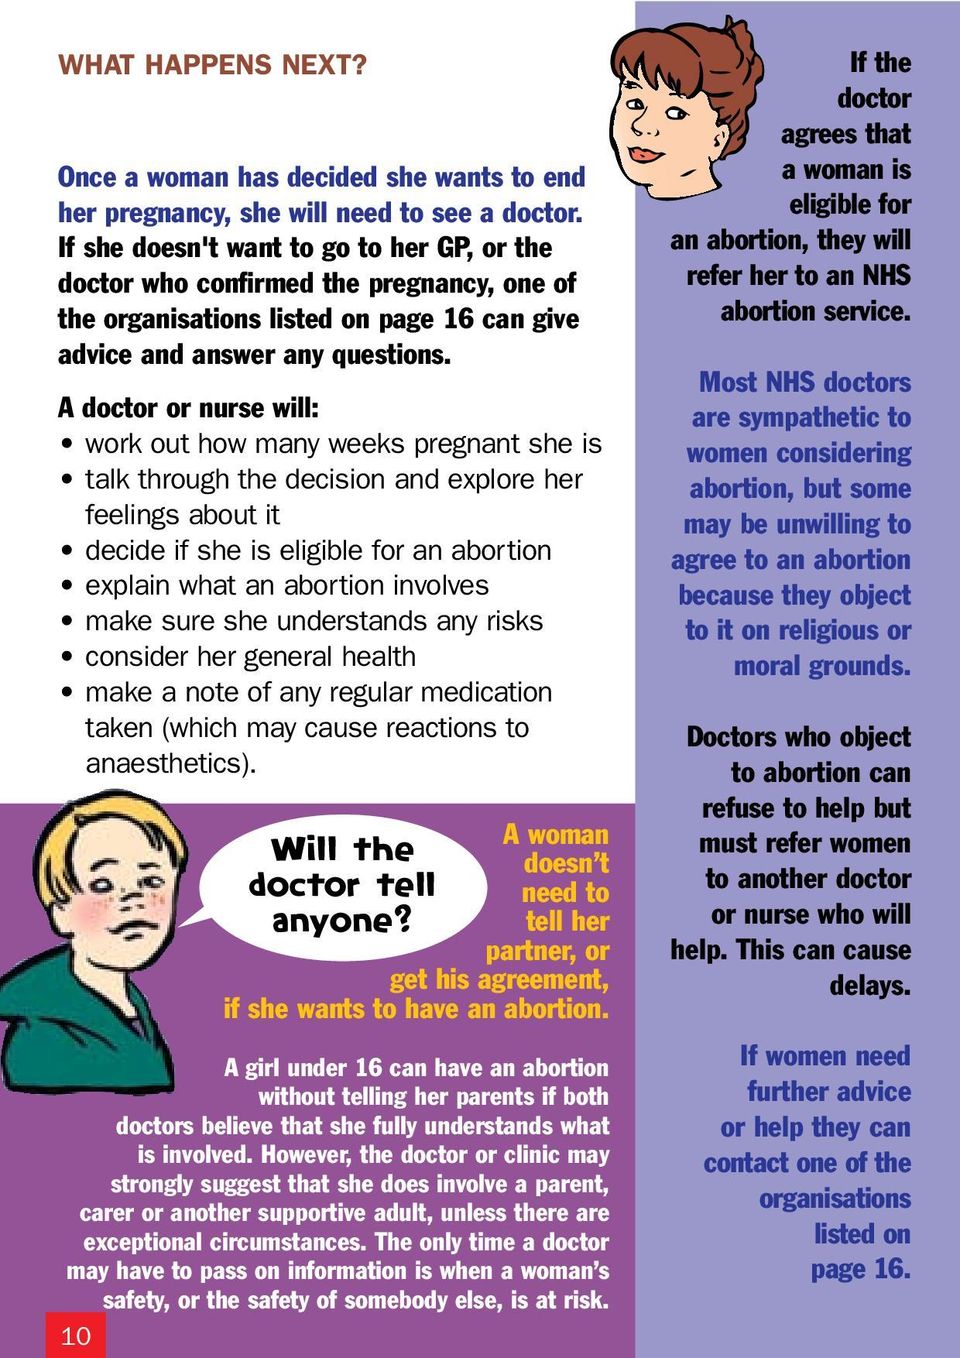 A doctor or nurse will: work out how many weeks pregnant she is talk through the decision and explore her feelings about it decide if she is eligible for an abortion explain what an abortion involves